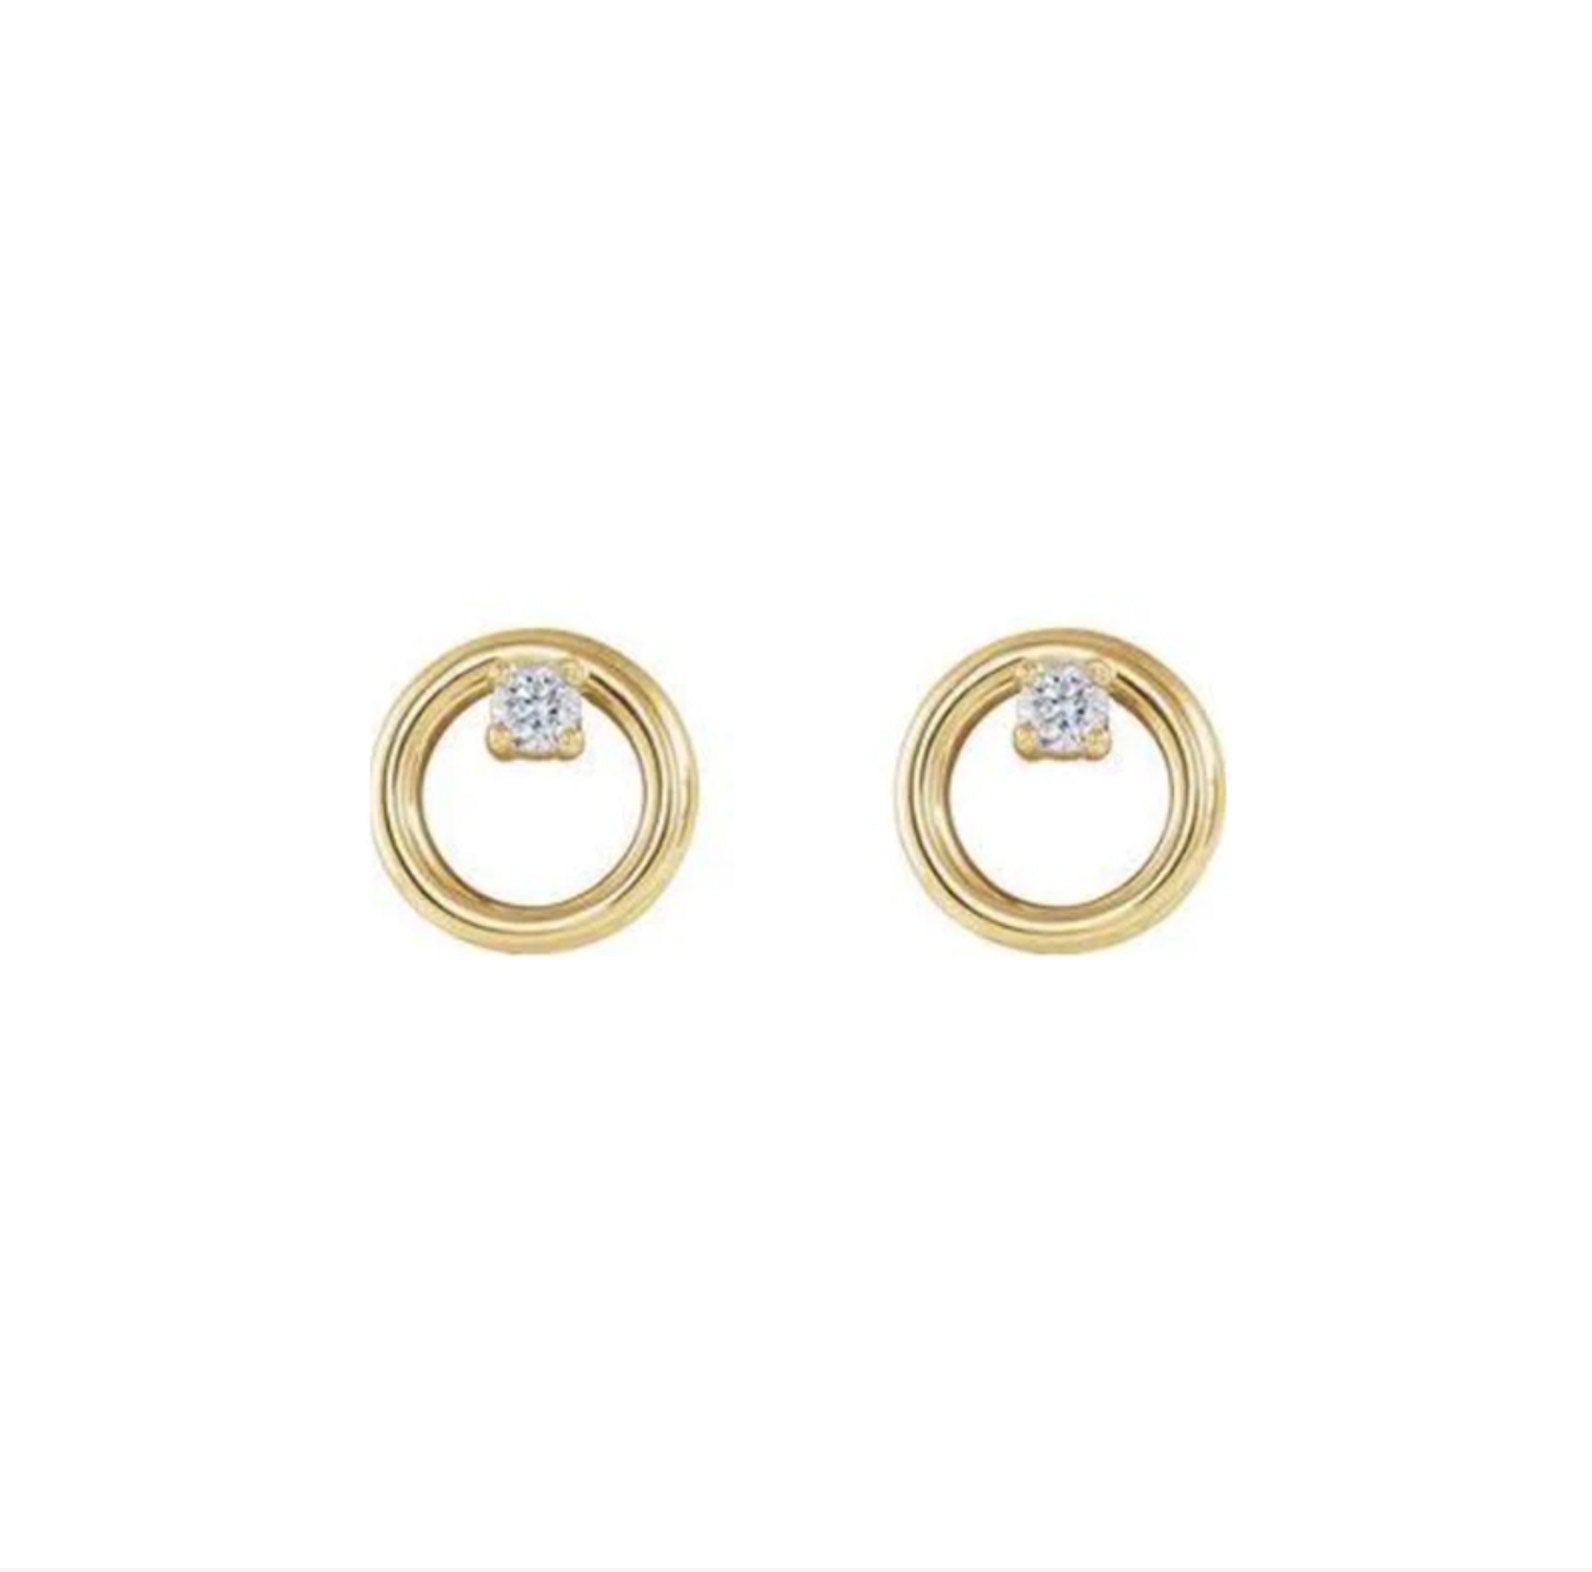 Circle diamond earrings on white background - Camille Jewelry